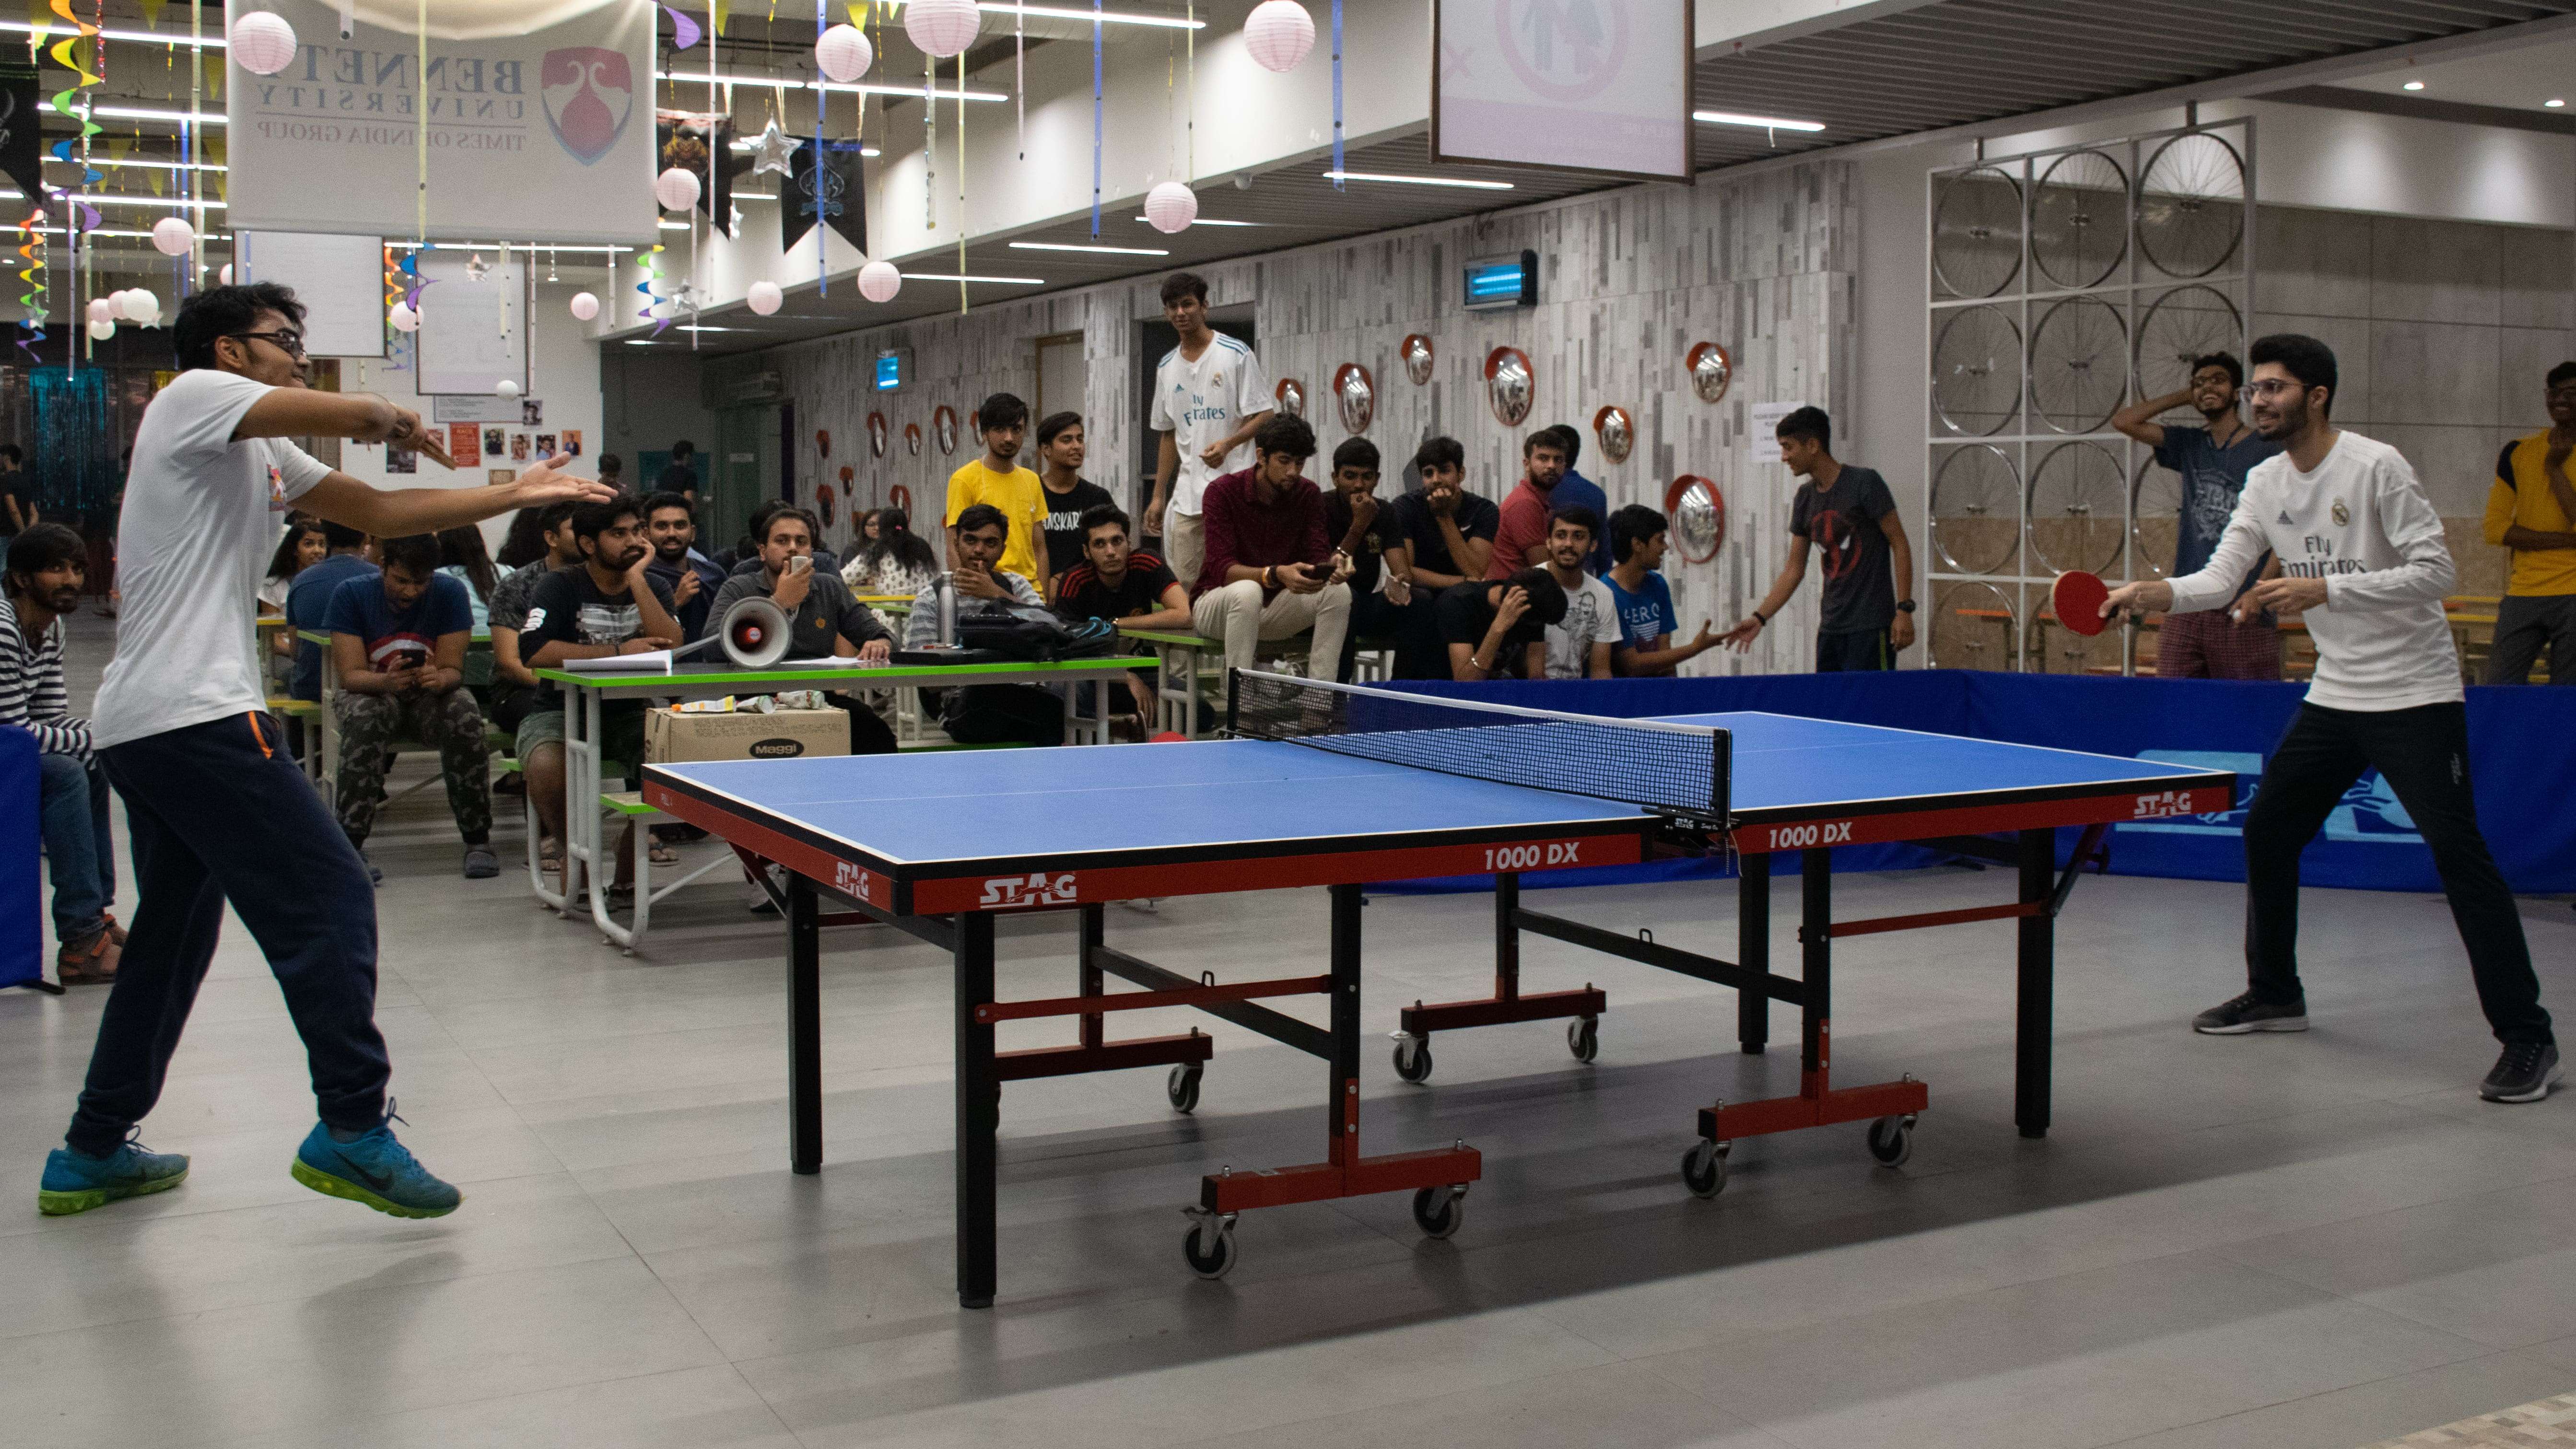 The players received huge support from friends and neutrals alike during the Ping Pong Finals. Showcased here is the 3rd place playoff between Mukund Mundhra (BTech) and Divyansh Gupta (BTech)